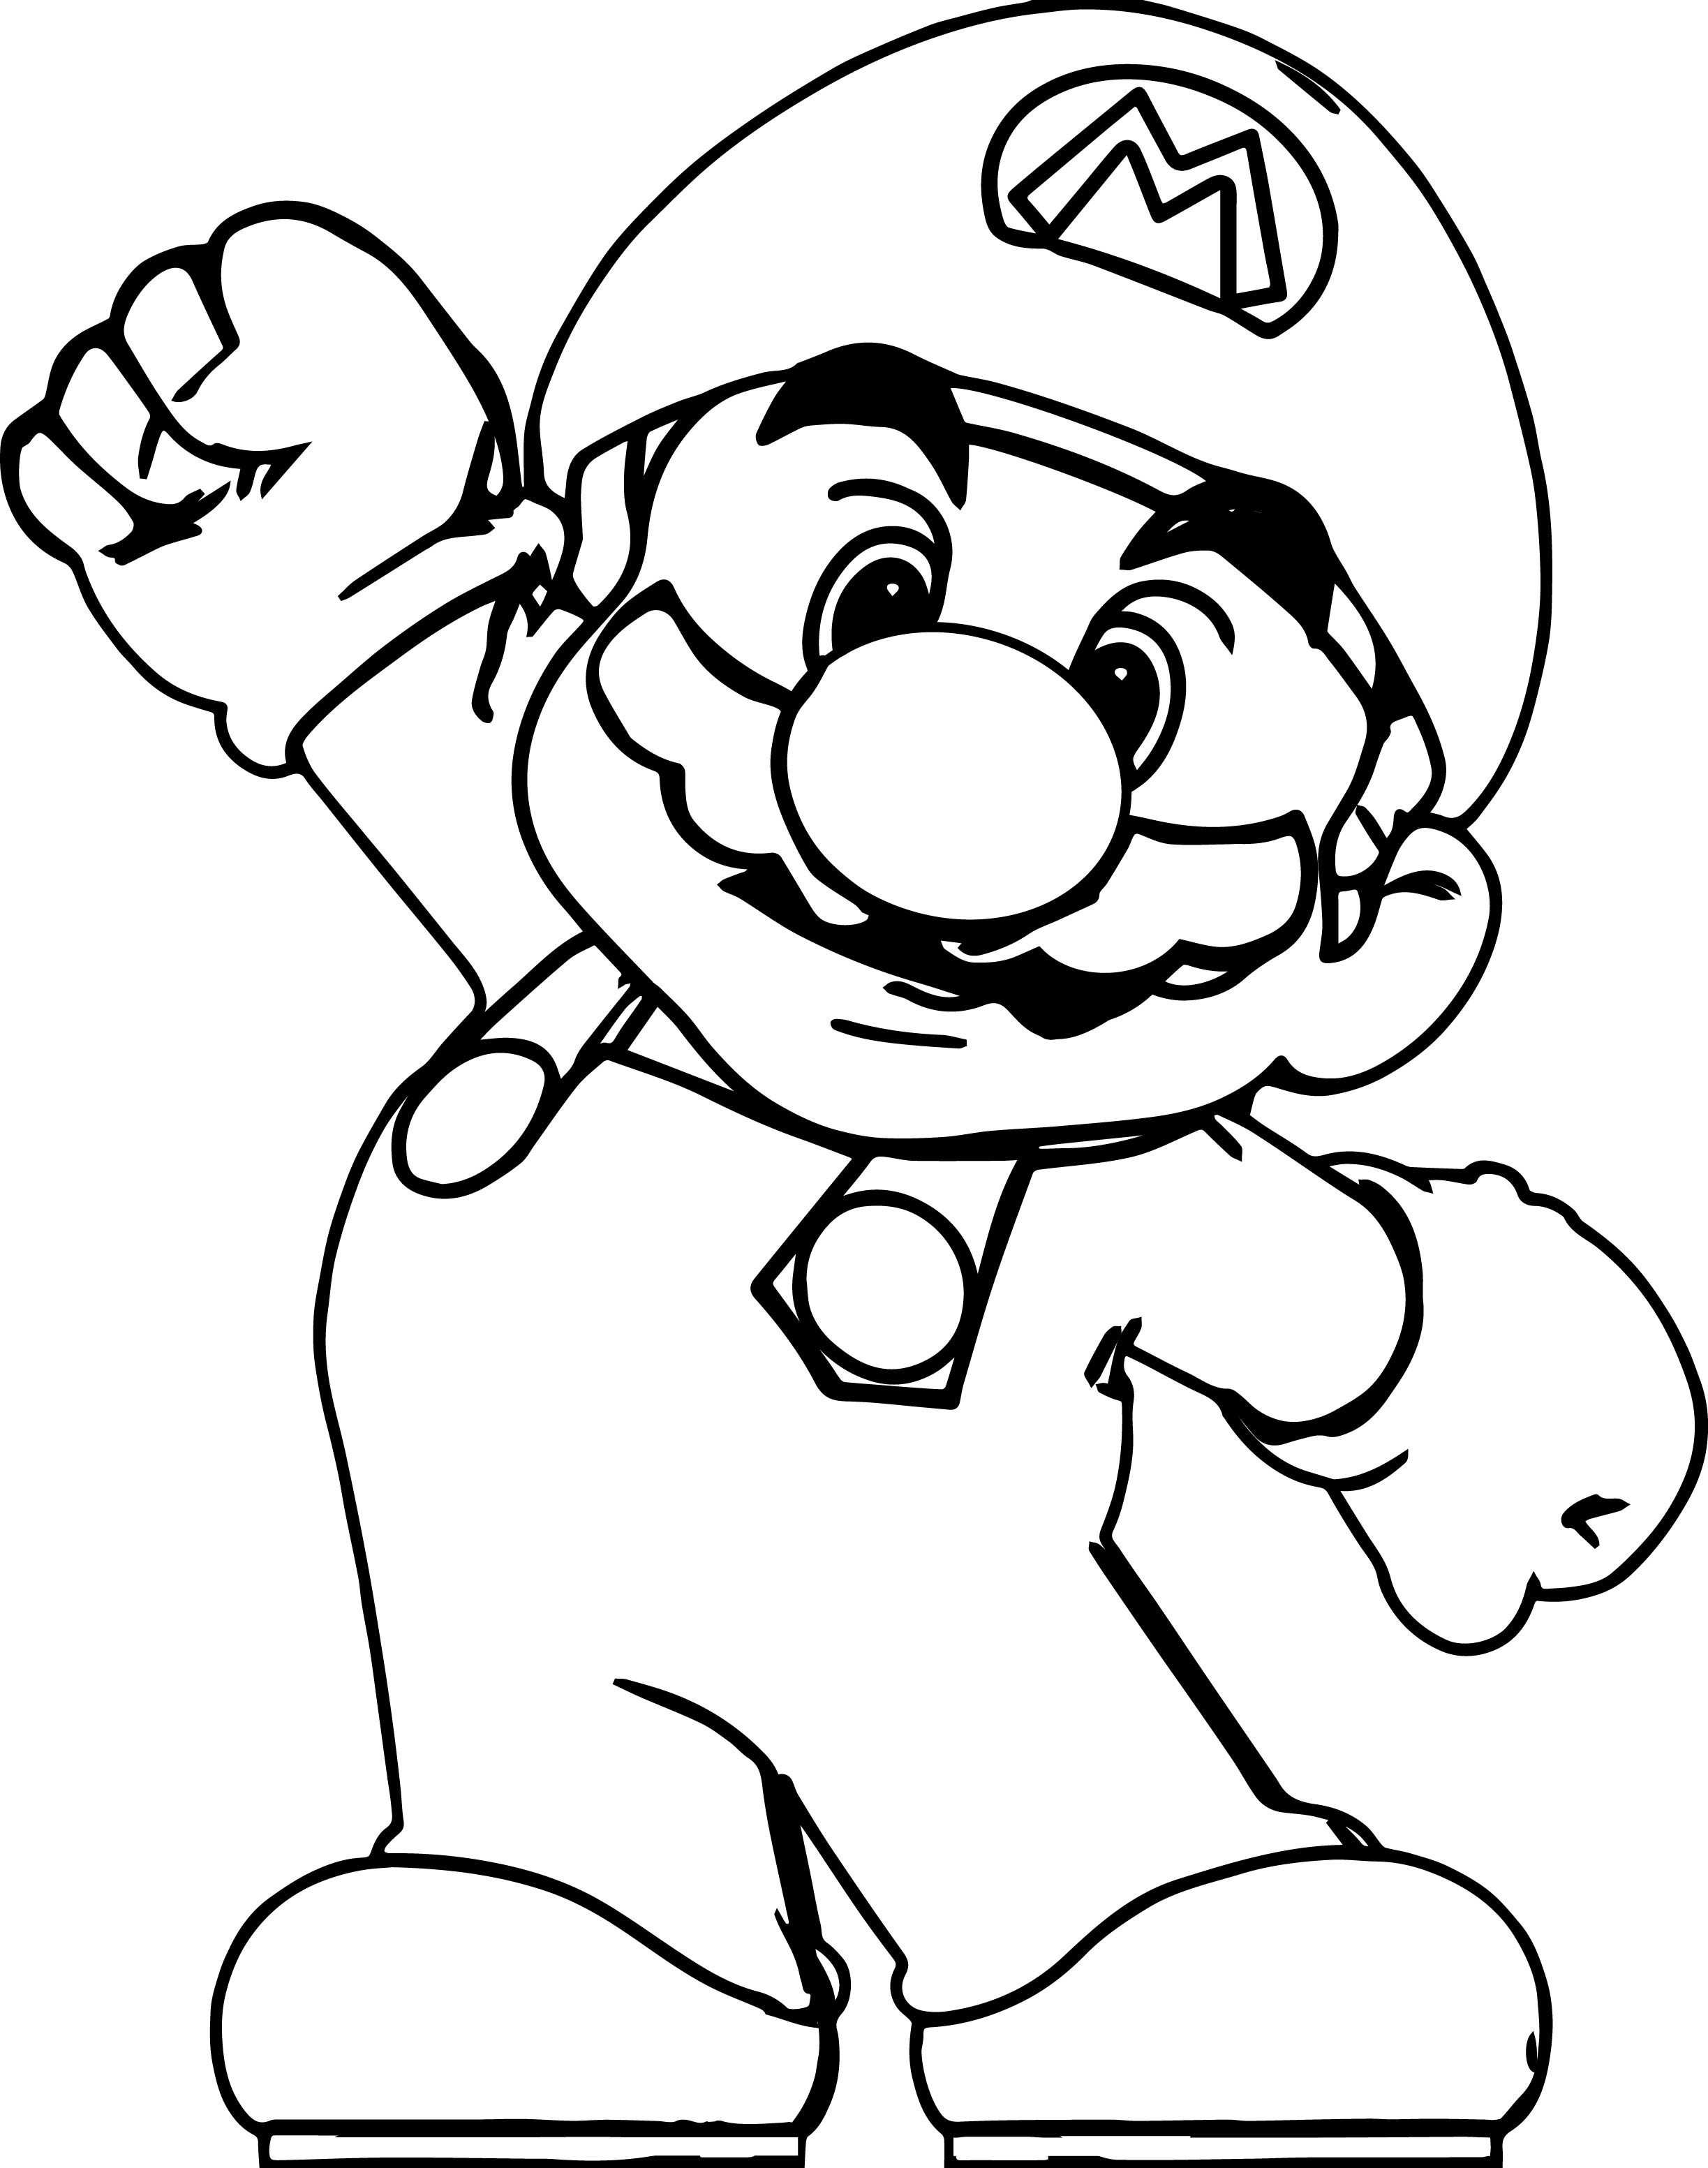 mario character coloring pages